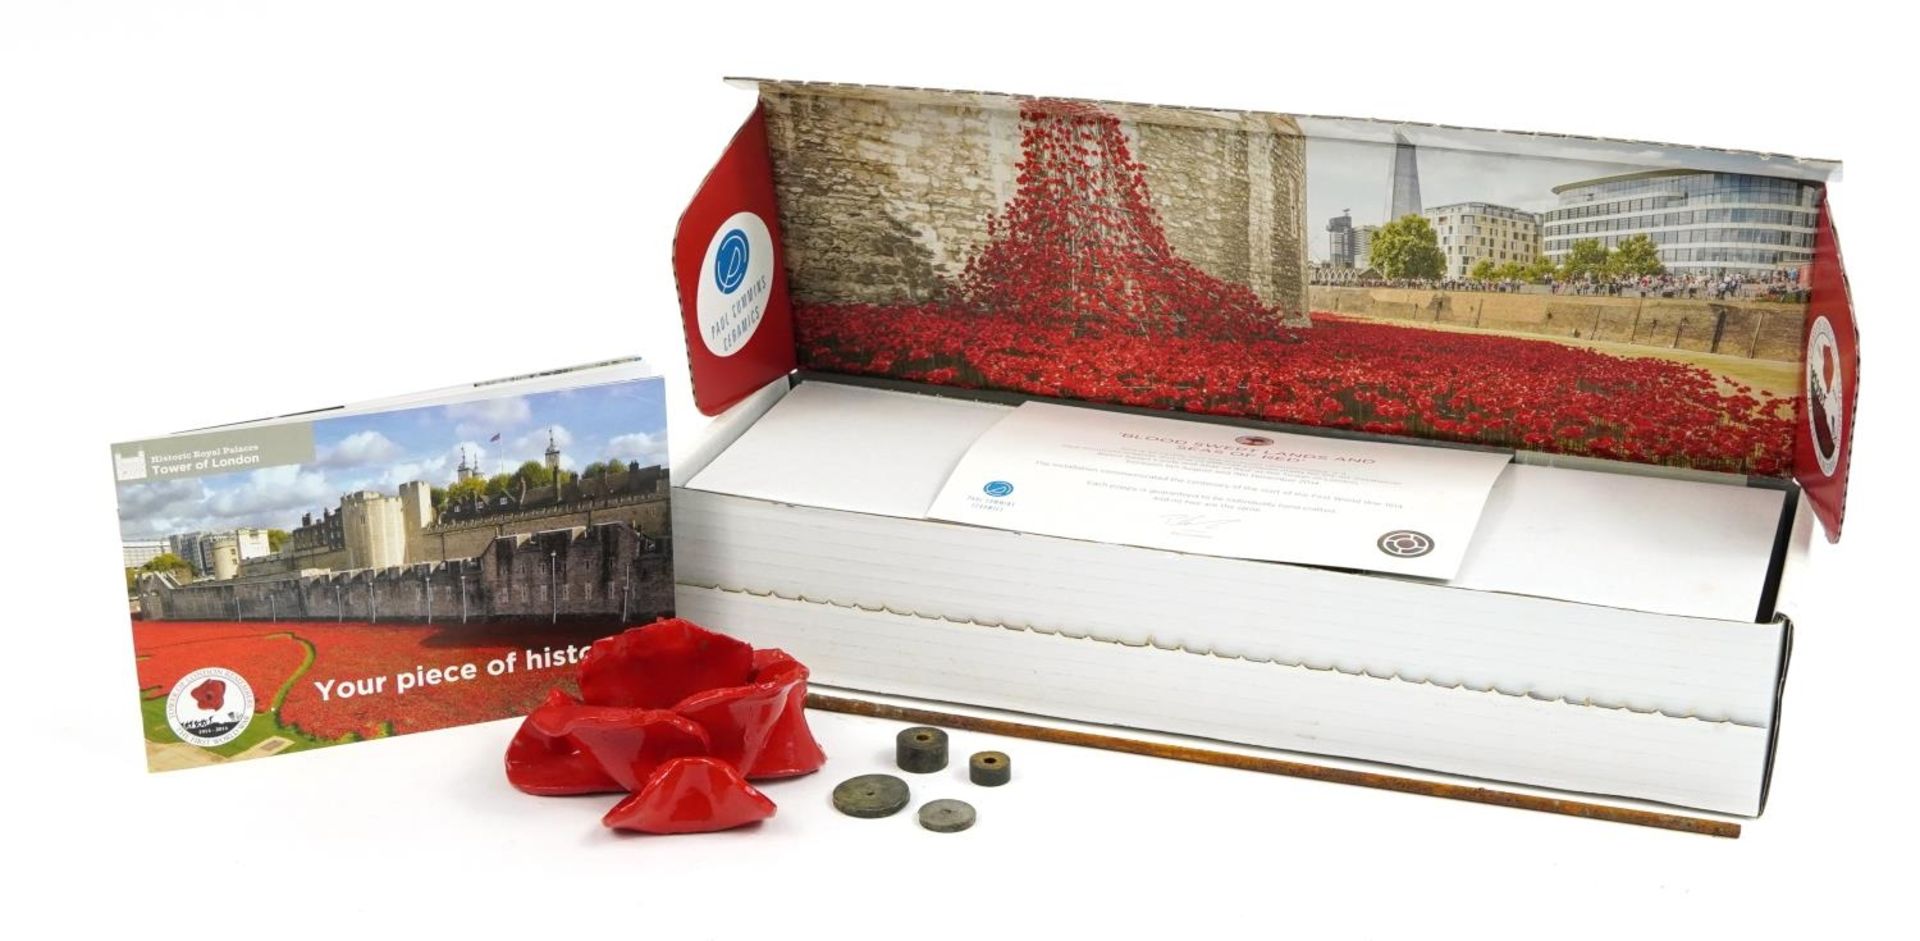 Paul Cummins ceramic poppy made for the art installation Blood, Sweat, Lands and Seas of Red at